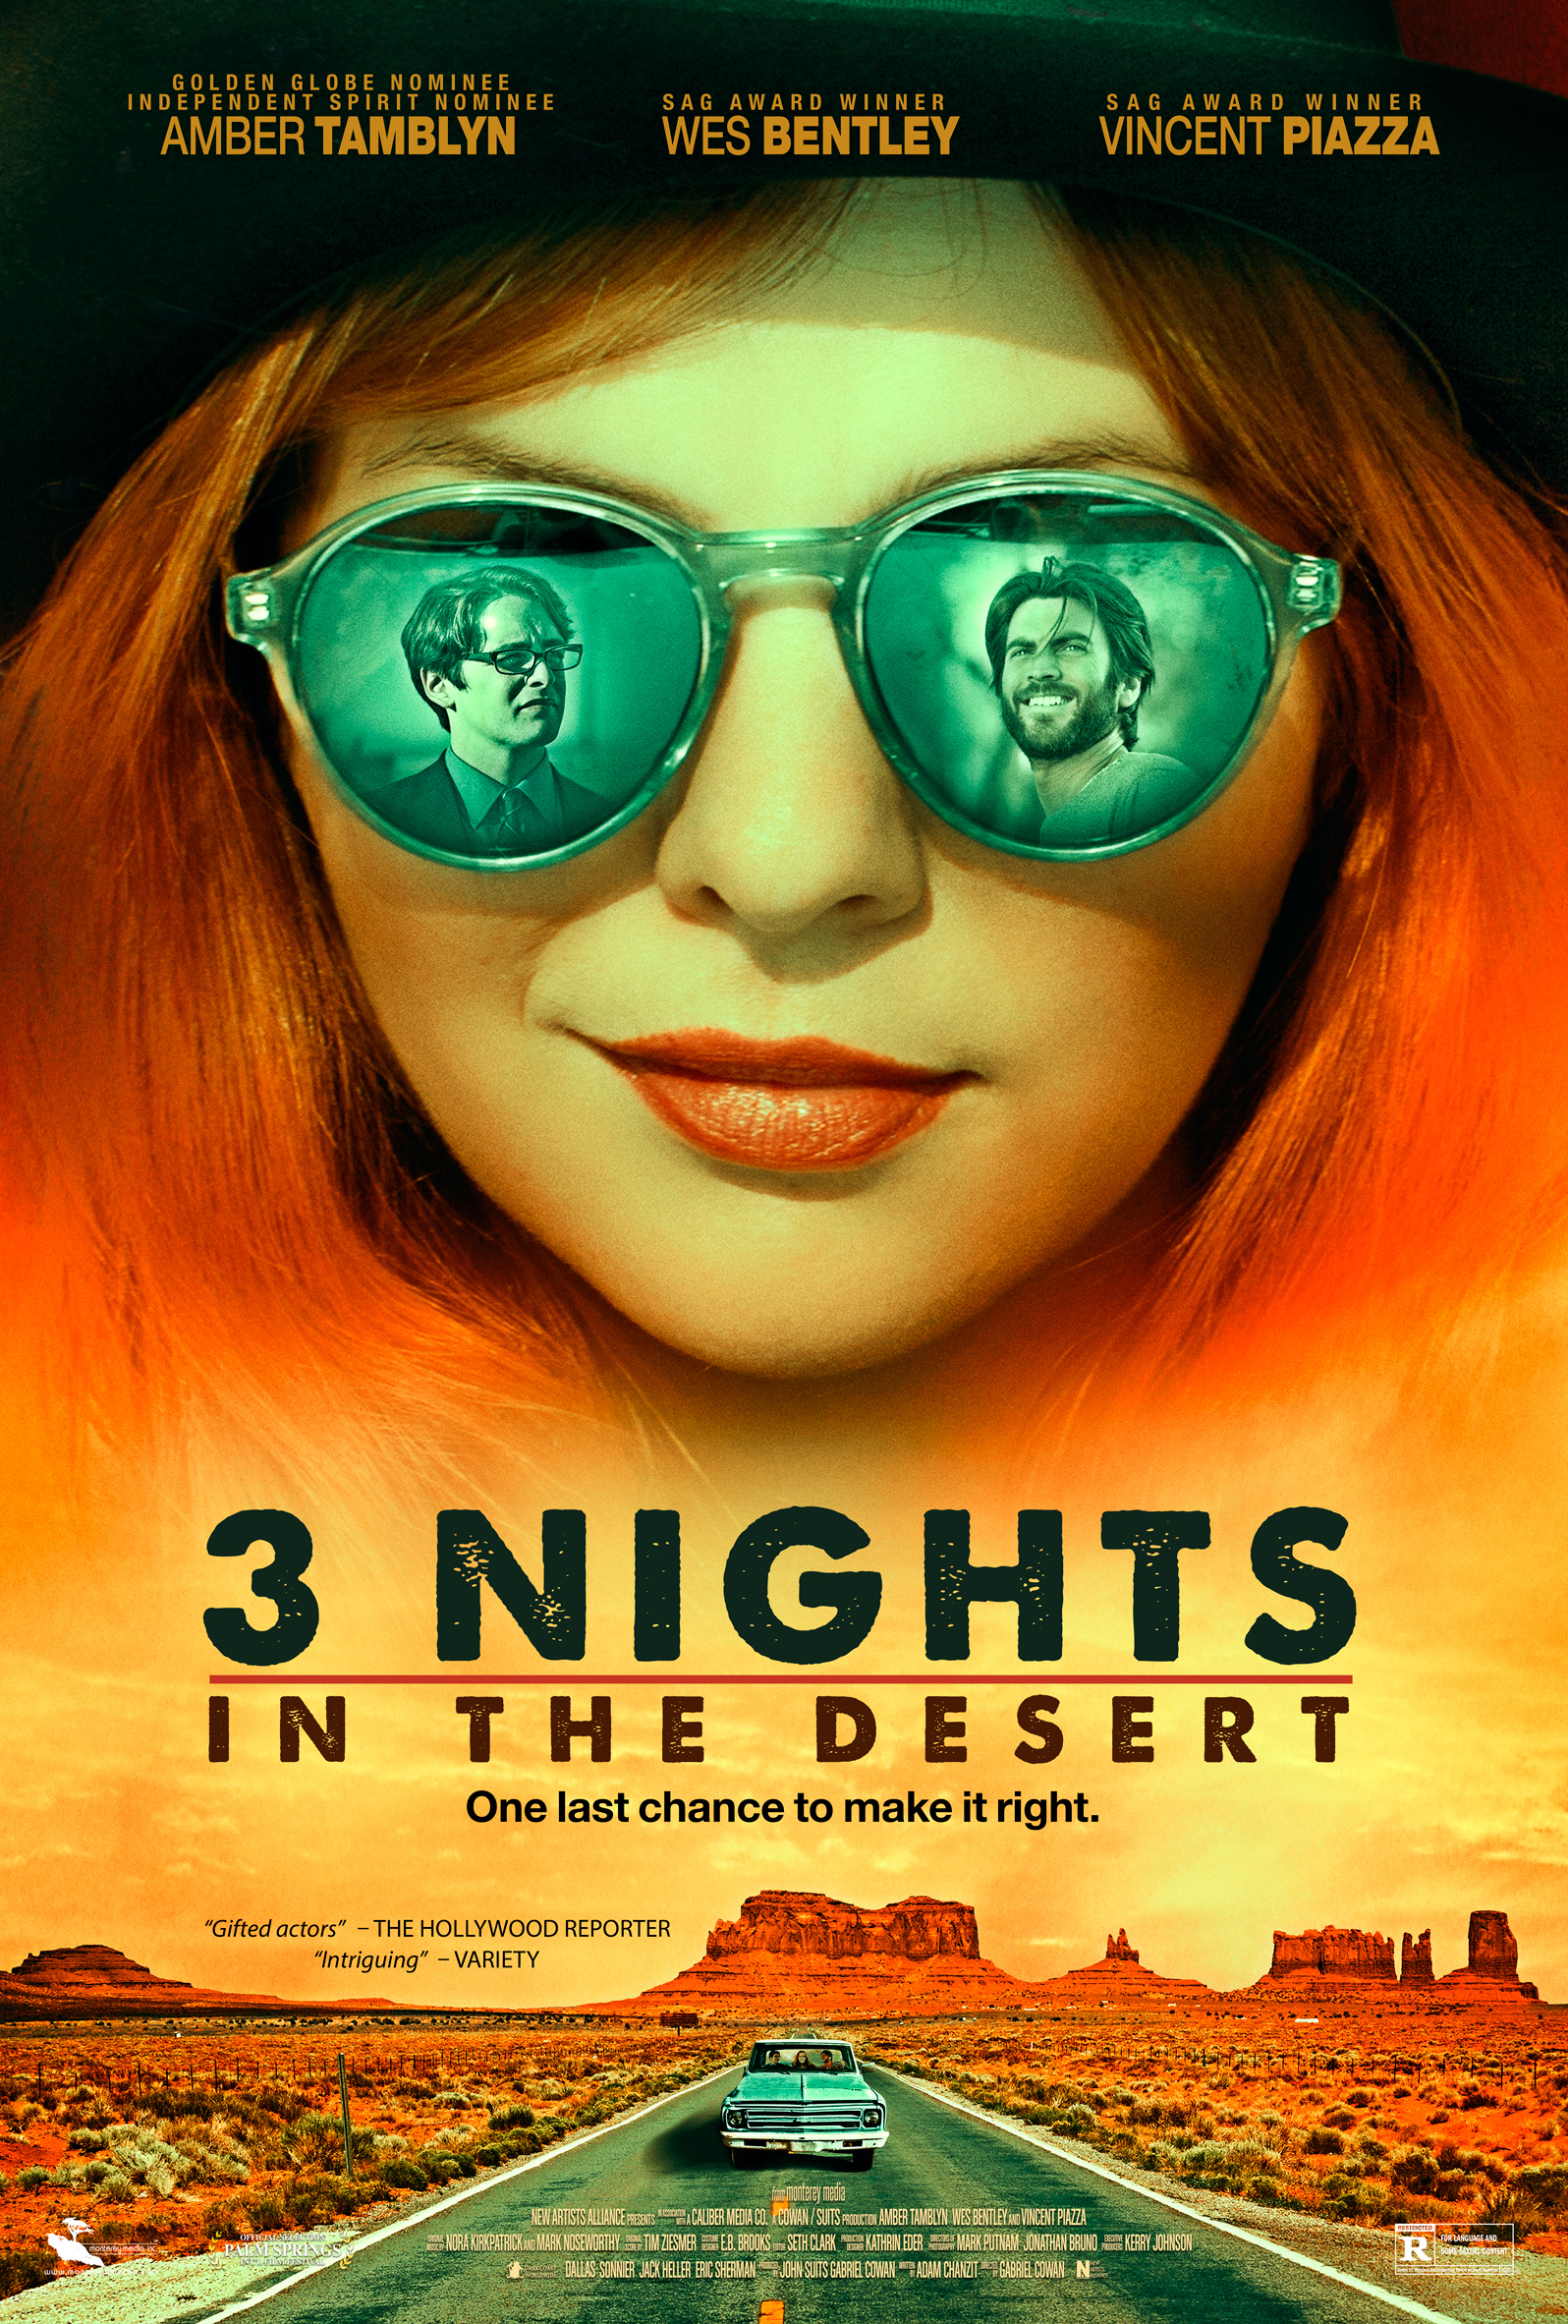 Wes Bentley, Amber Tamblyn and Vincent Piazza in 3 Nights in the Desert (2014)